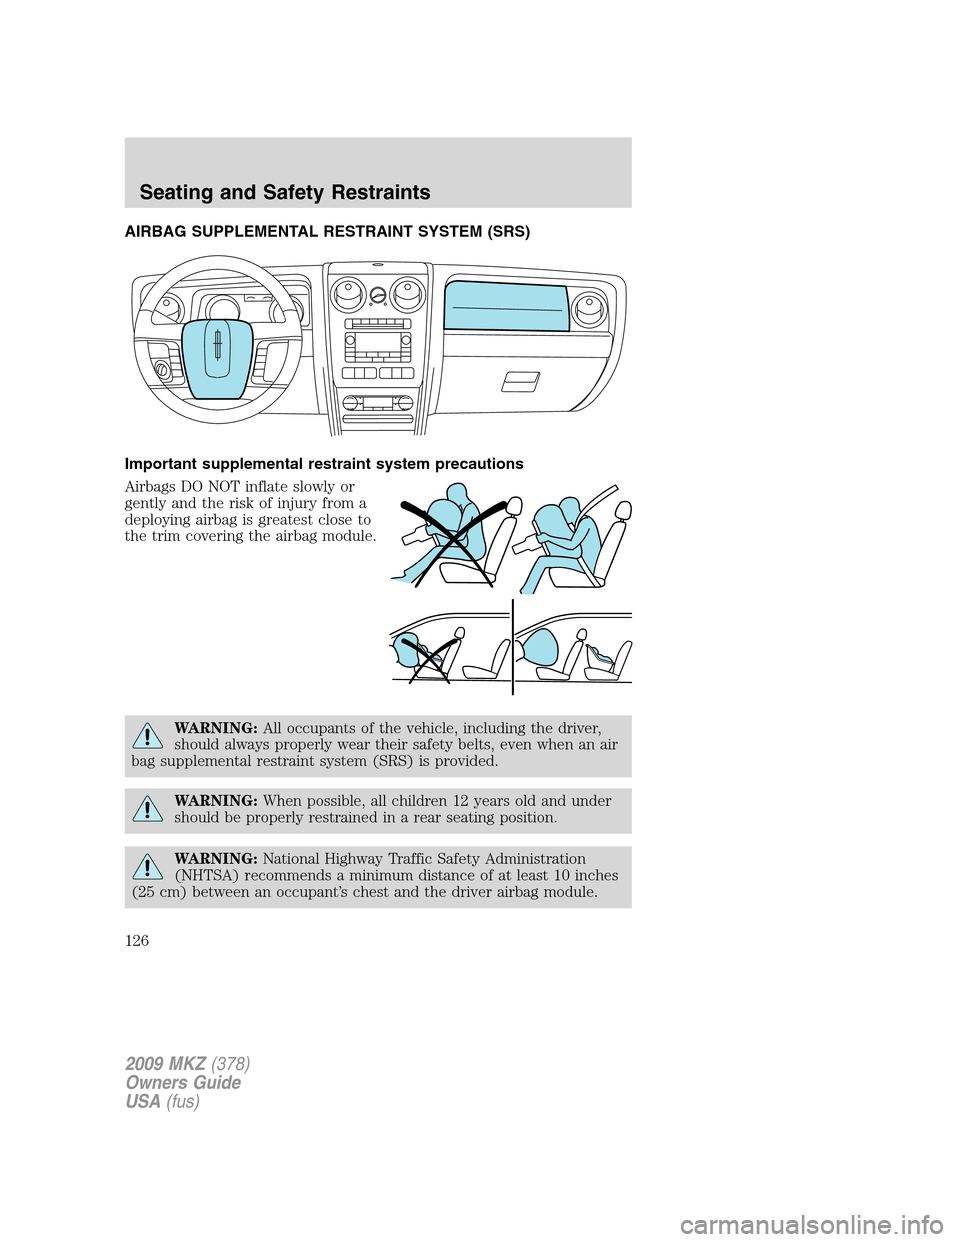 LINCOLN MKZ 2009  Owners Manual AIRBAG SUPPLEMENTAL RESTRAINT SYSTEM (SRS)
Important supplemental restraint system precautions
Airbags DO NOT inflate slowly or
gently and the risk of injury from a
deploying airbag is greatest close 